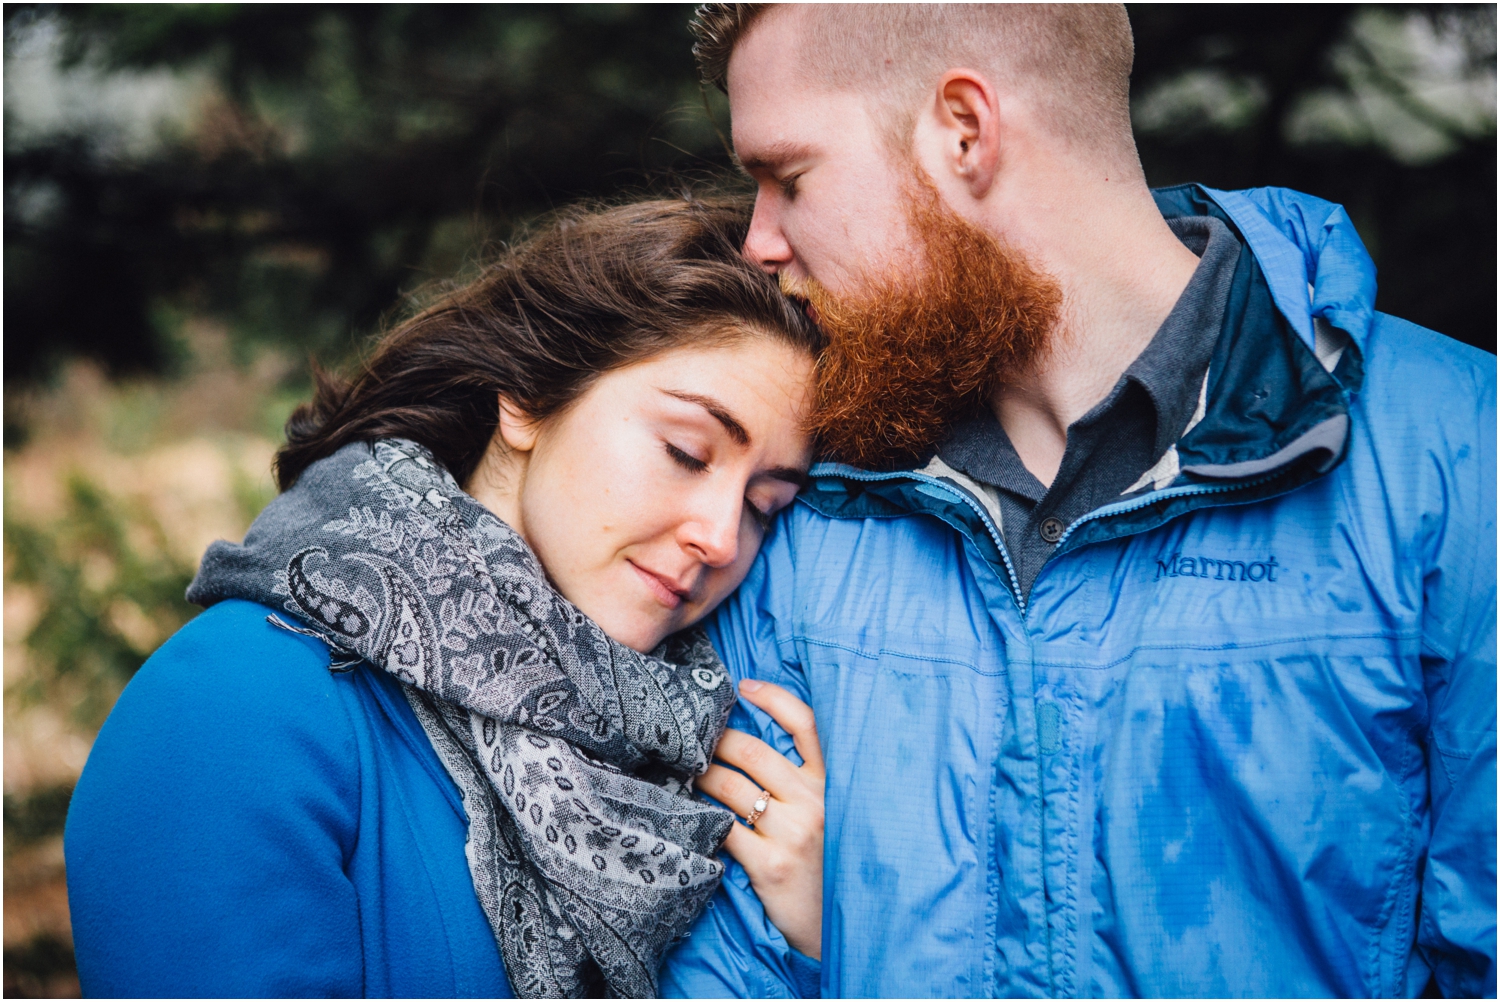 katy-sergent-photography-grayson-highlands-engagement-session-mouth-of-wilson-virginia-damascus-appalachian-trail-tennessee-wedding-elopement_0007.jpg